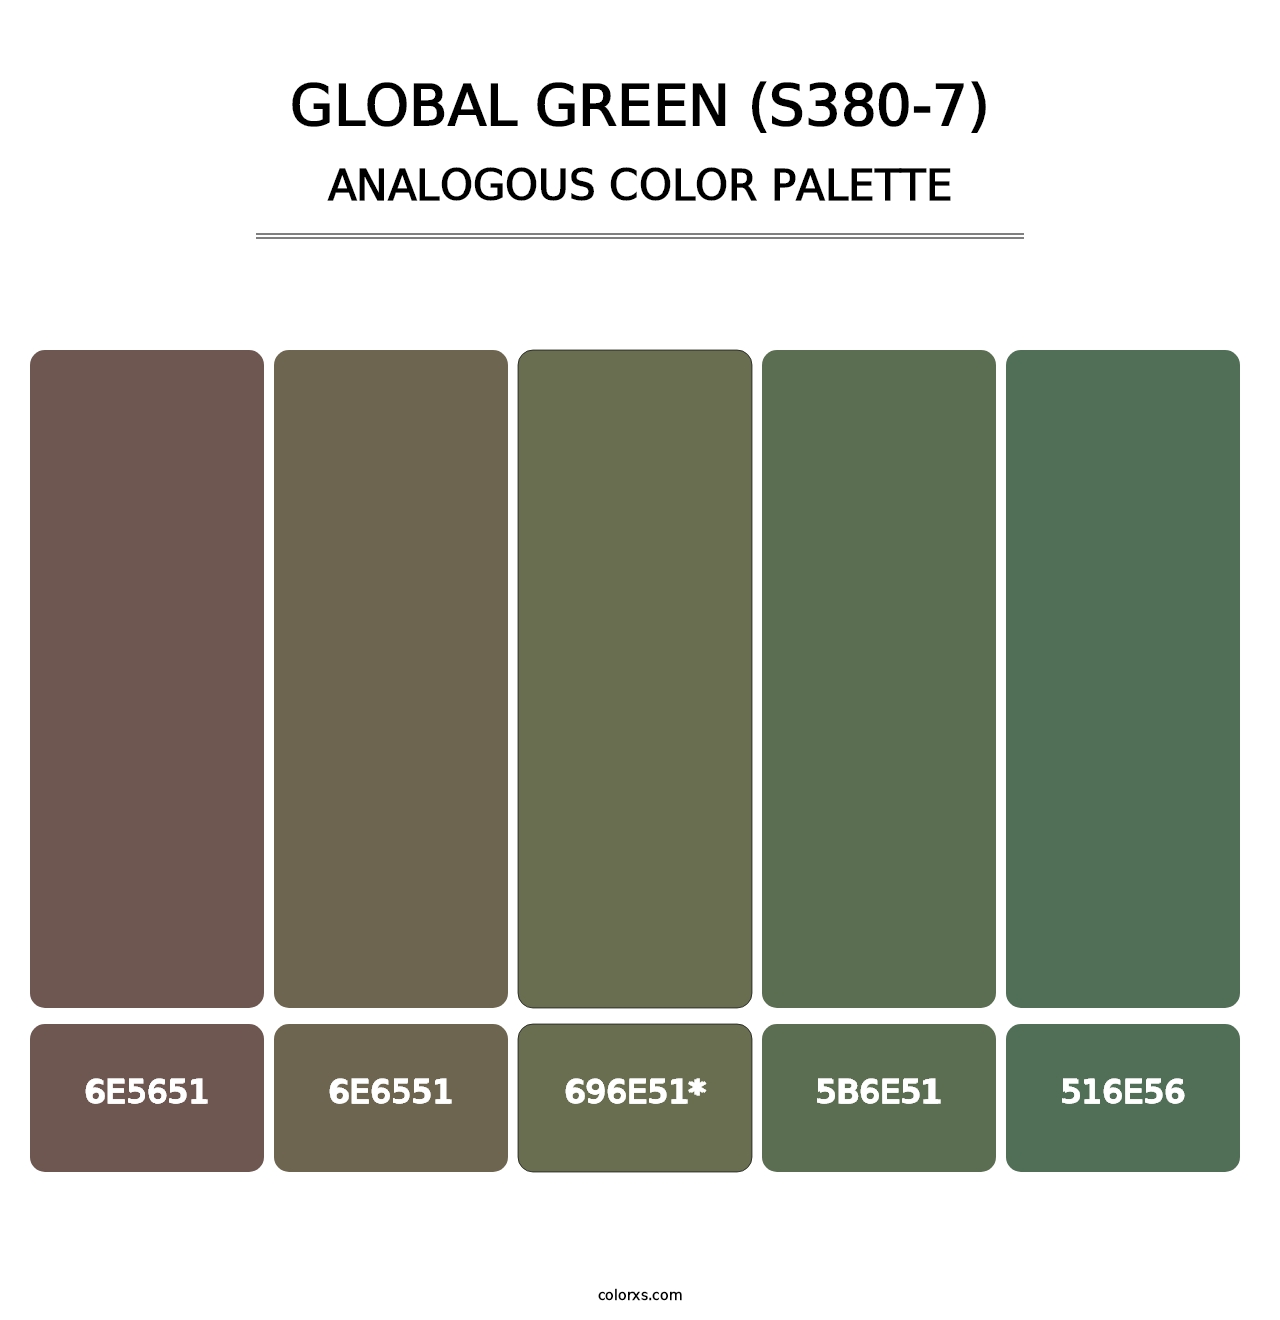 Global Green (S380-7) - Analogous Color Palette